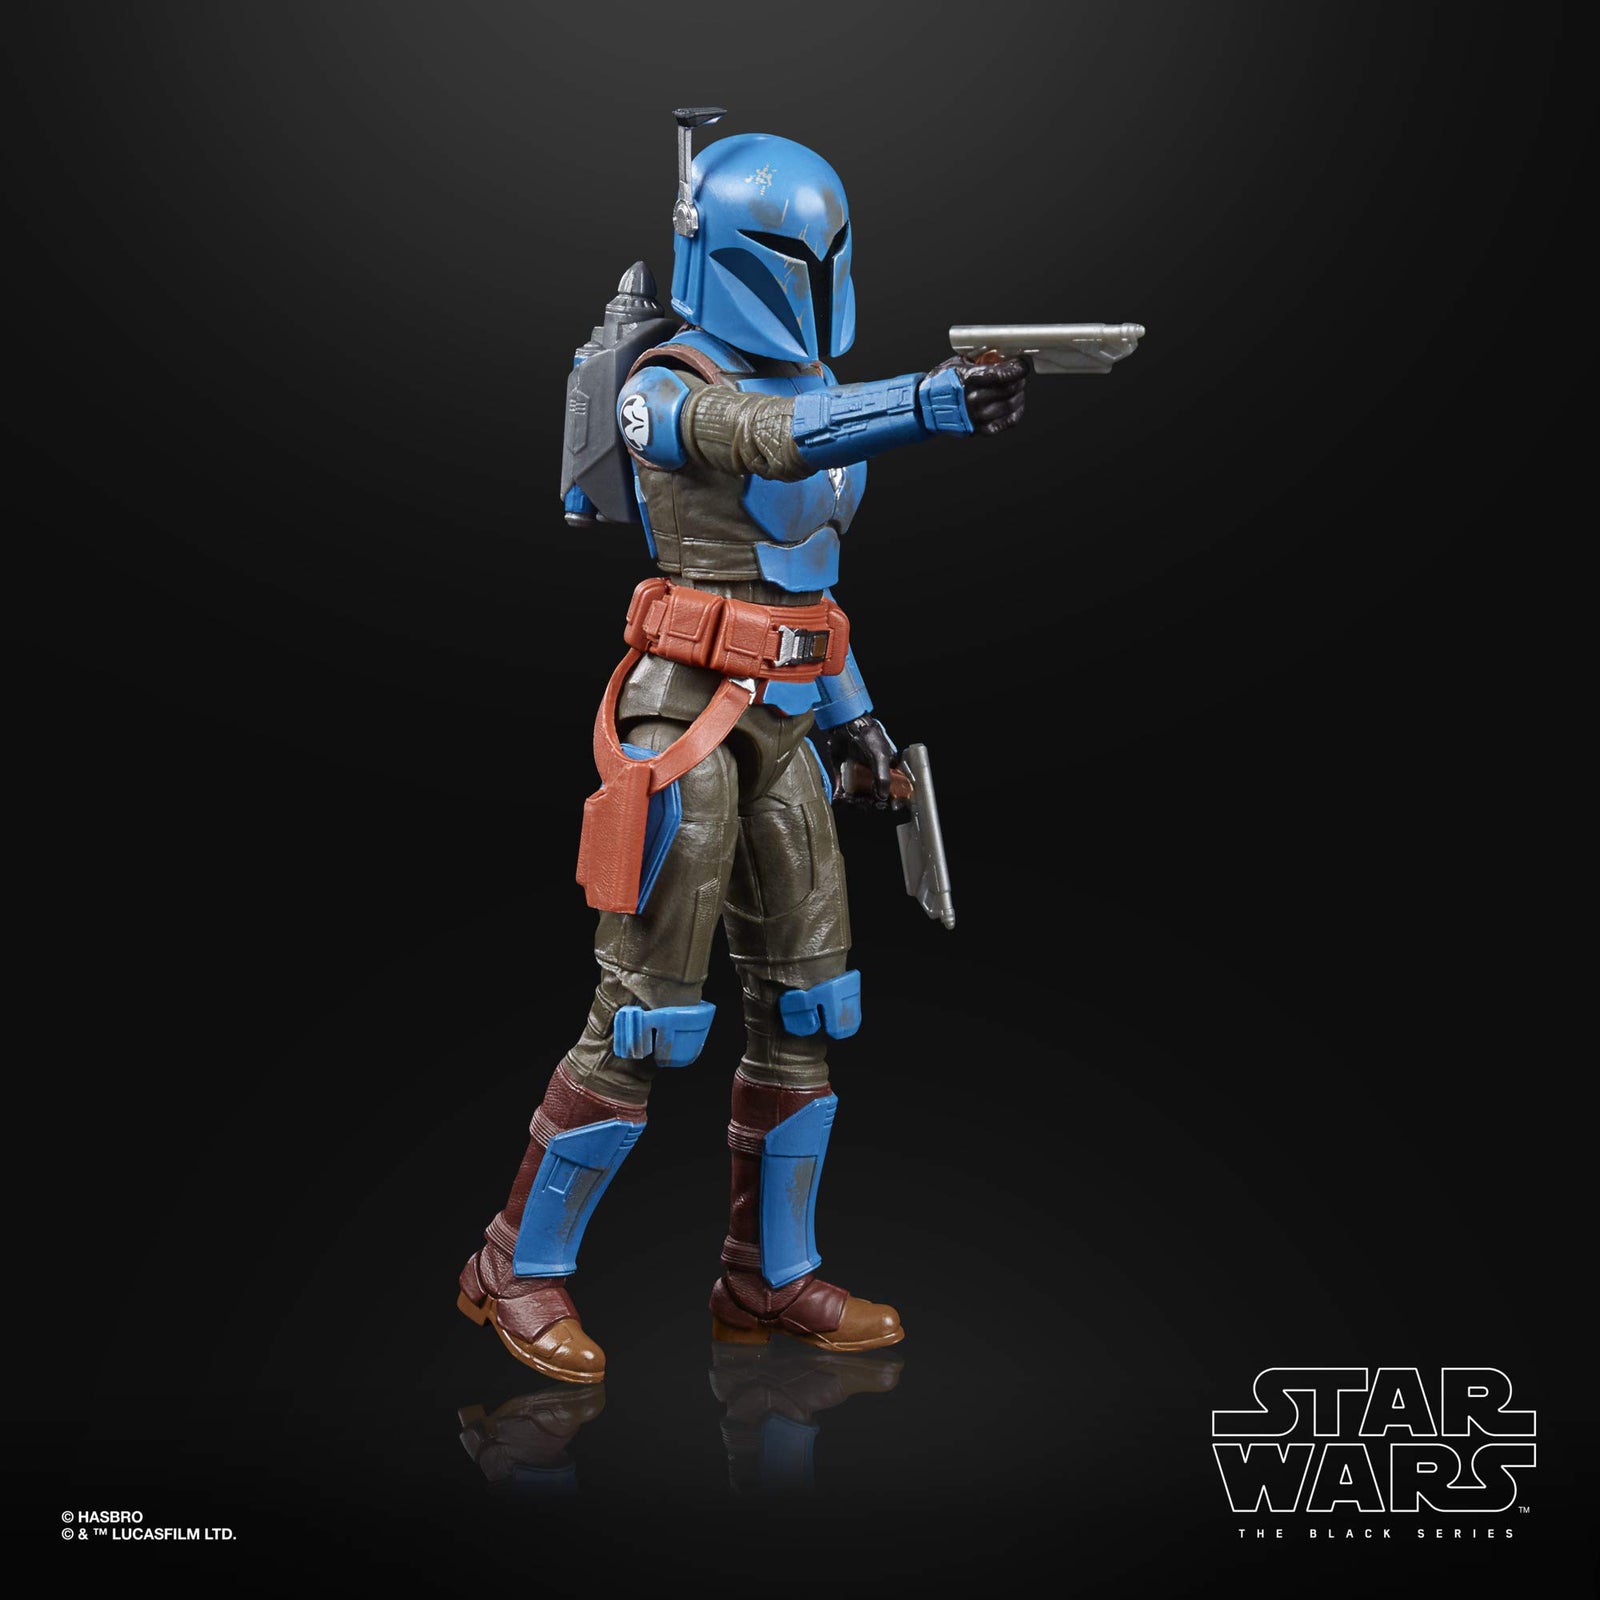 Star Wars The Black Series Koska Reeves Toy 6-Inch-Scale The Mandalorian Collectible Figure with Accessories, Toys for Kids Ages 4 and Up,F1878